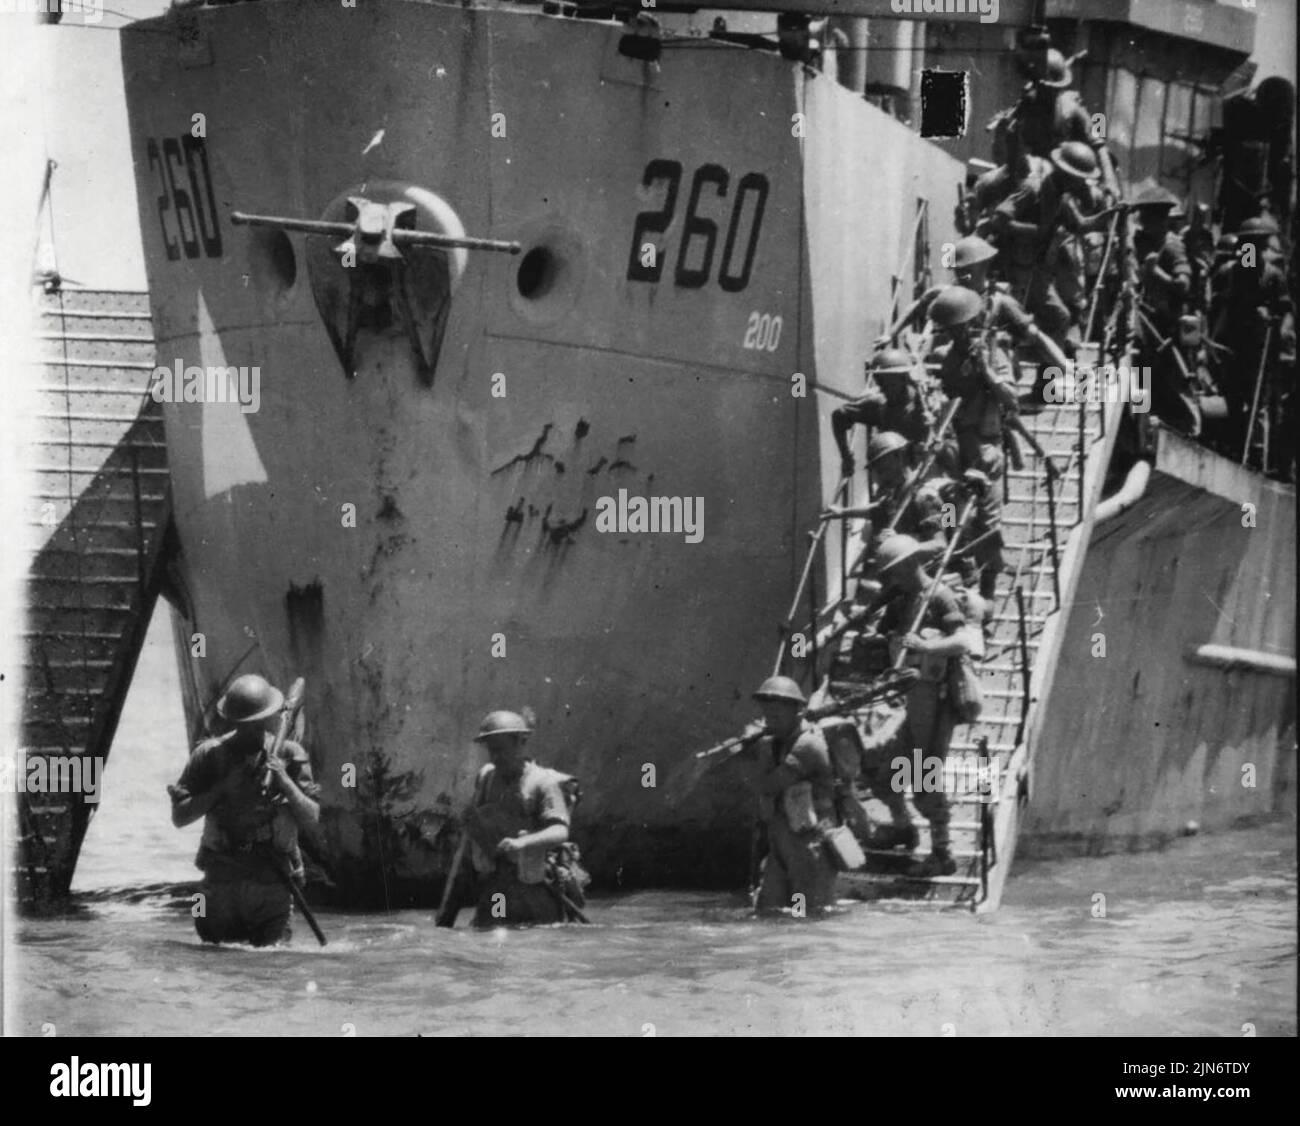 Invasion of Sicily Early Stages of the Landing -- Infantry coming down the steps from landing craft.Thousands of craft of all types were used in the invasion of Sicily, including entirely new types. Here are some of the early scene during and after the landing which began on July 10. July 17, 1943. (Photo by British Official Photo). Stock Photo